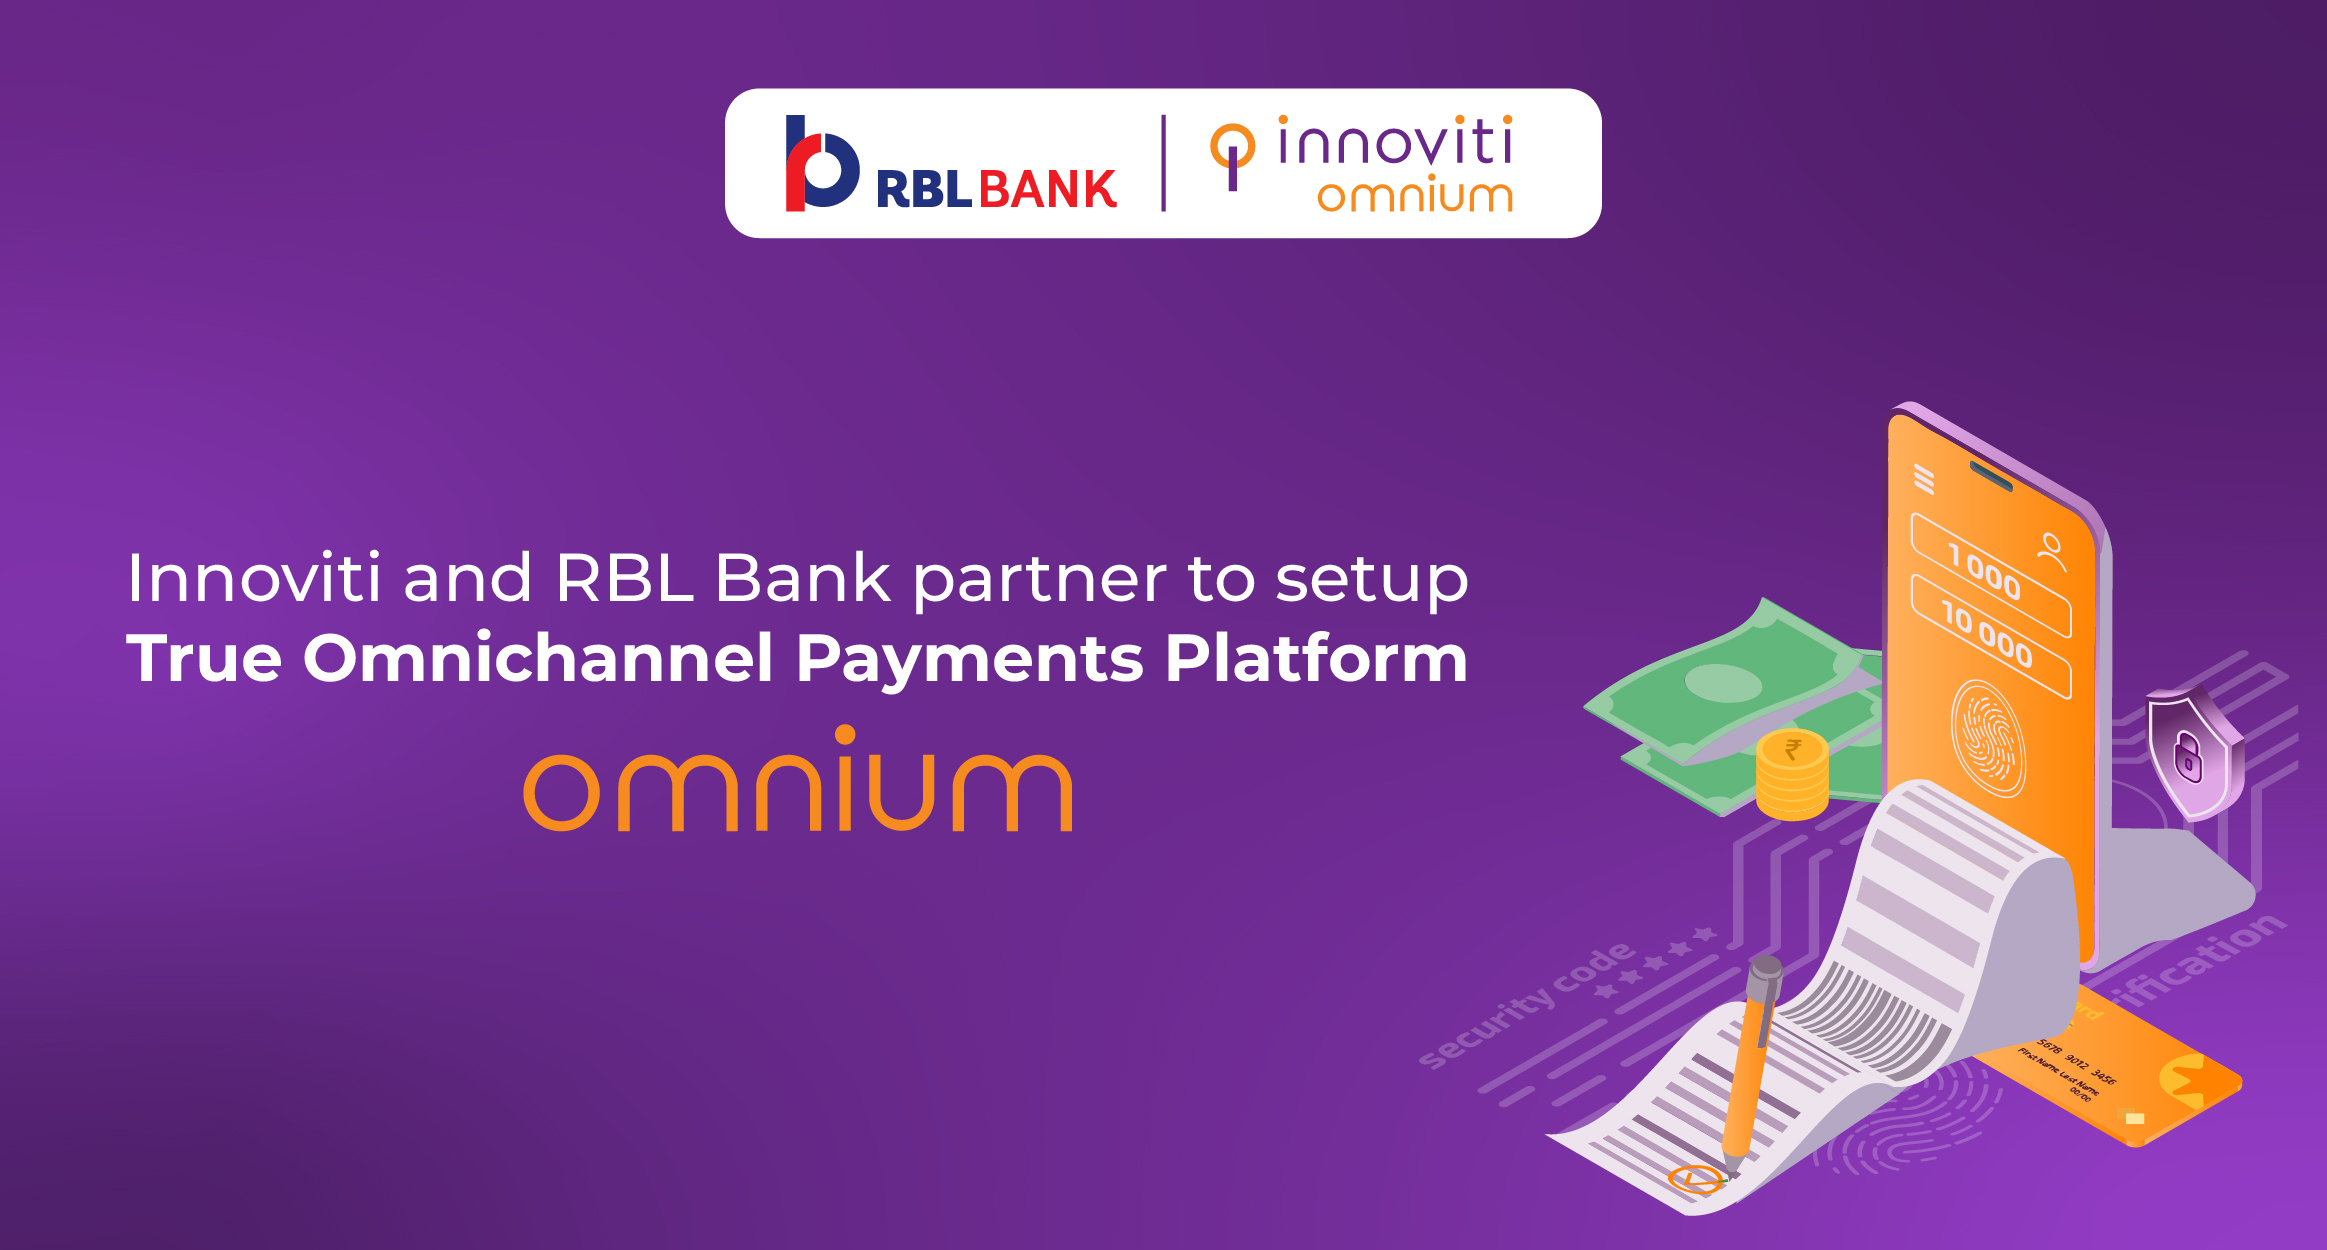 INNOVITI AND RBL BANK PARTNER TO SET UP A TRUE OMNICHANNEL PAYMENTS PLATFORM FOR PROGRESSIVE RETAILERS